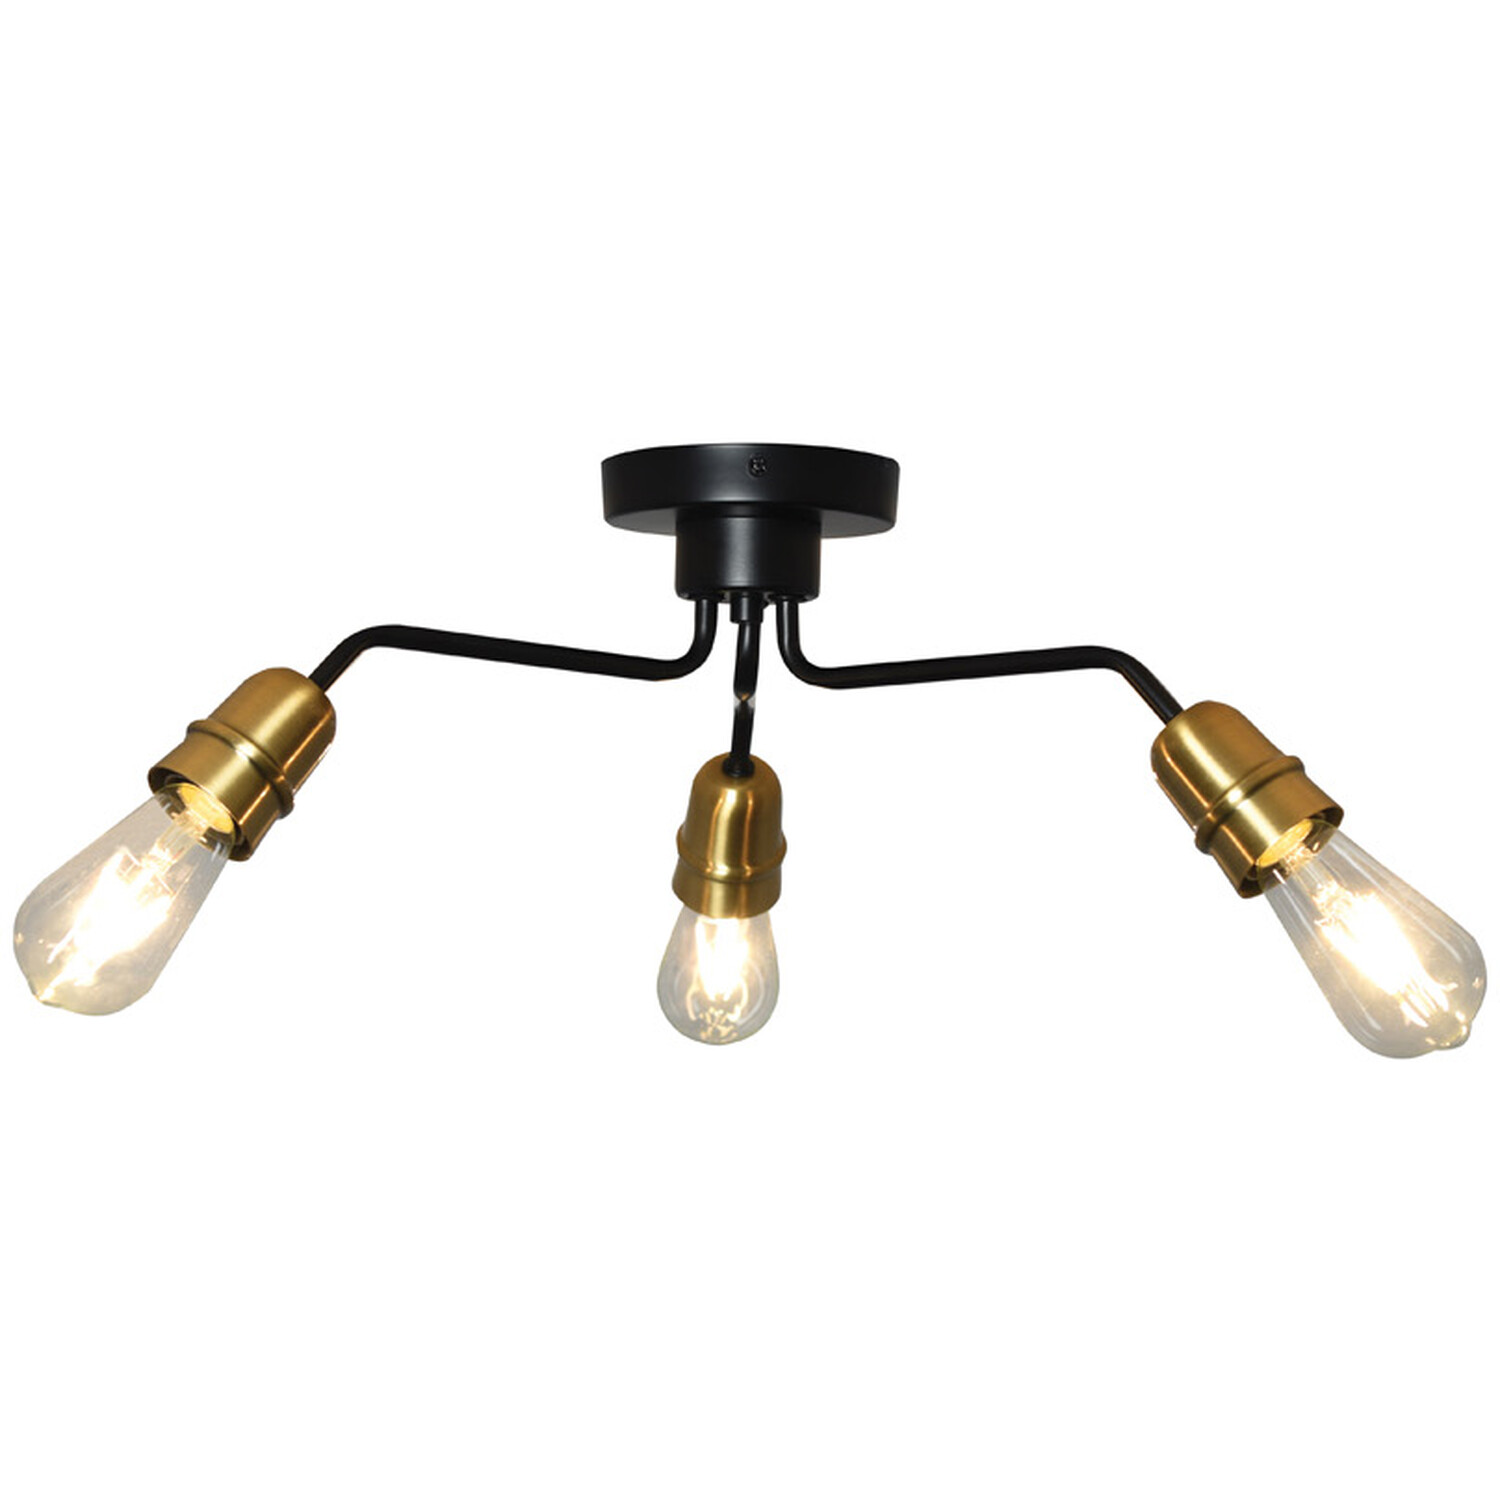 Remy 3 Light industrial Ceiling Light Image 1